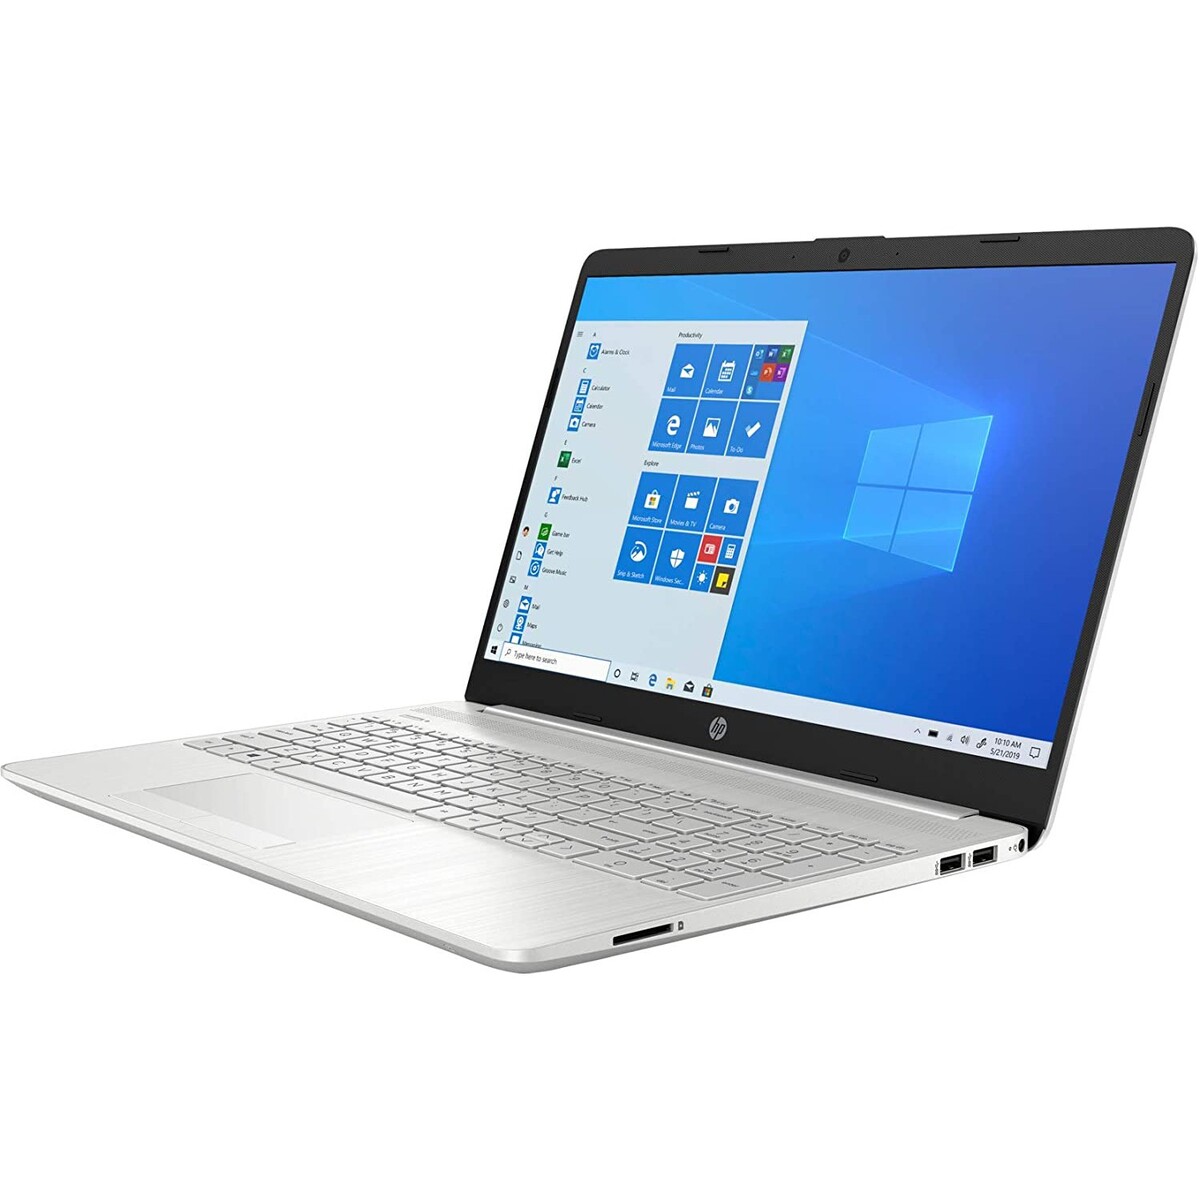 HP Notebook GY0501AU AMD R3 15.6" Win 10 Natural silver